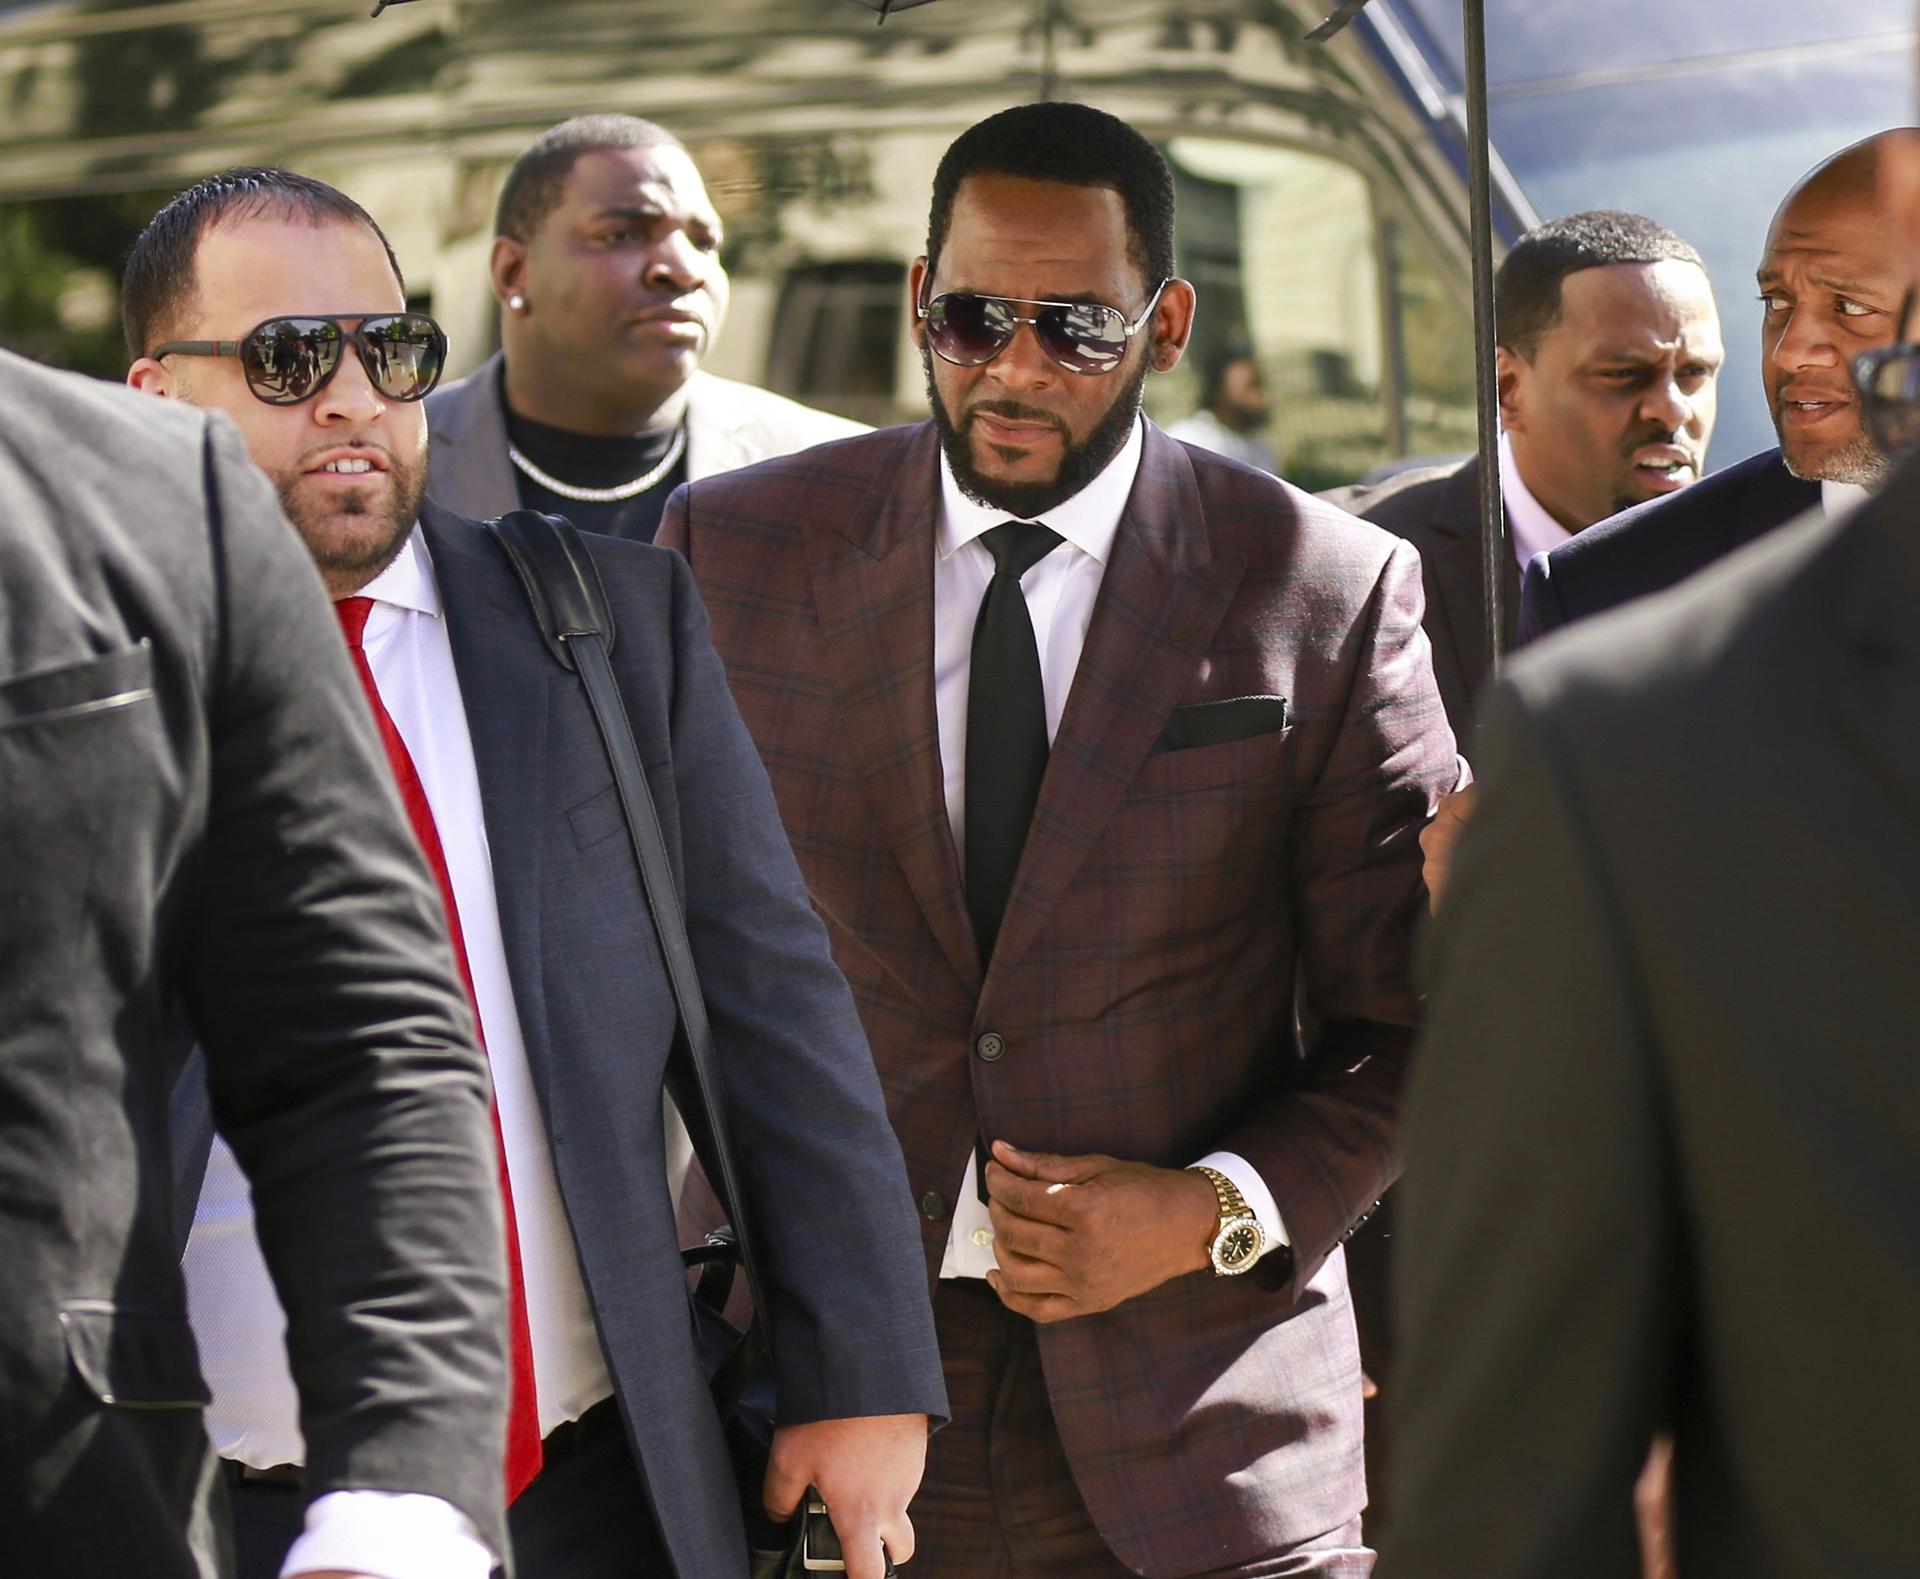 In this June 26, 2019, file photo, R&B singer R. Kelly, center, arrives at the Leighton Criminal Court building for an arraignment on sex-related felonies in Chicago. (AP Photo / Amr Alfiky, File)